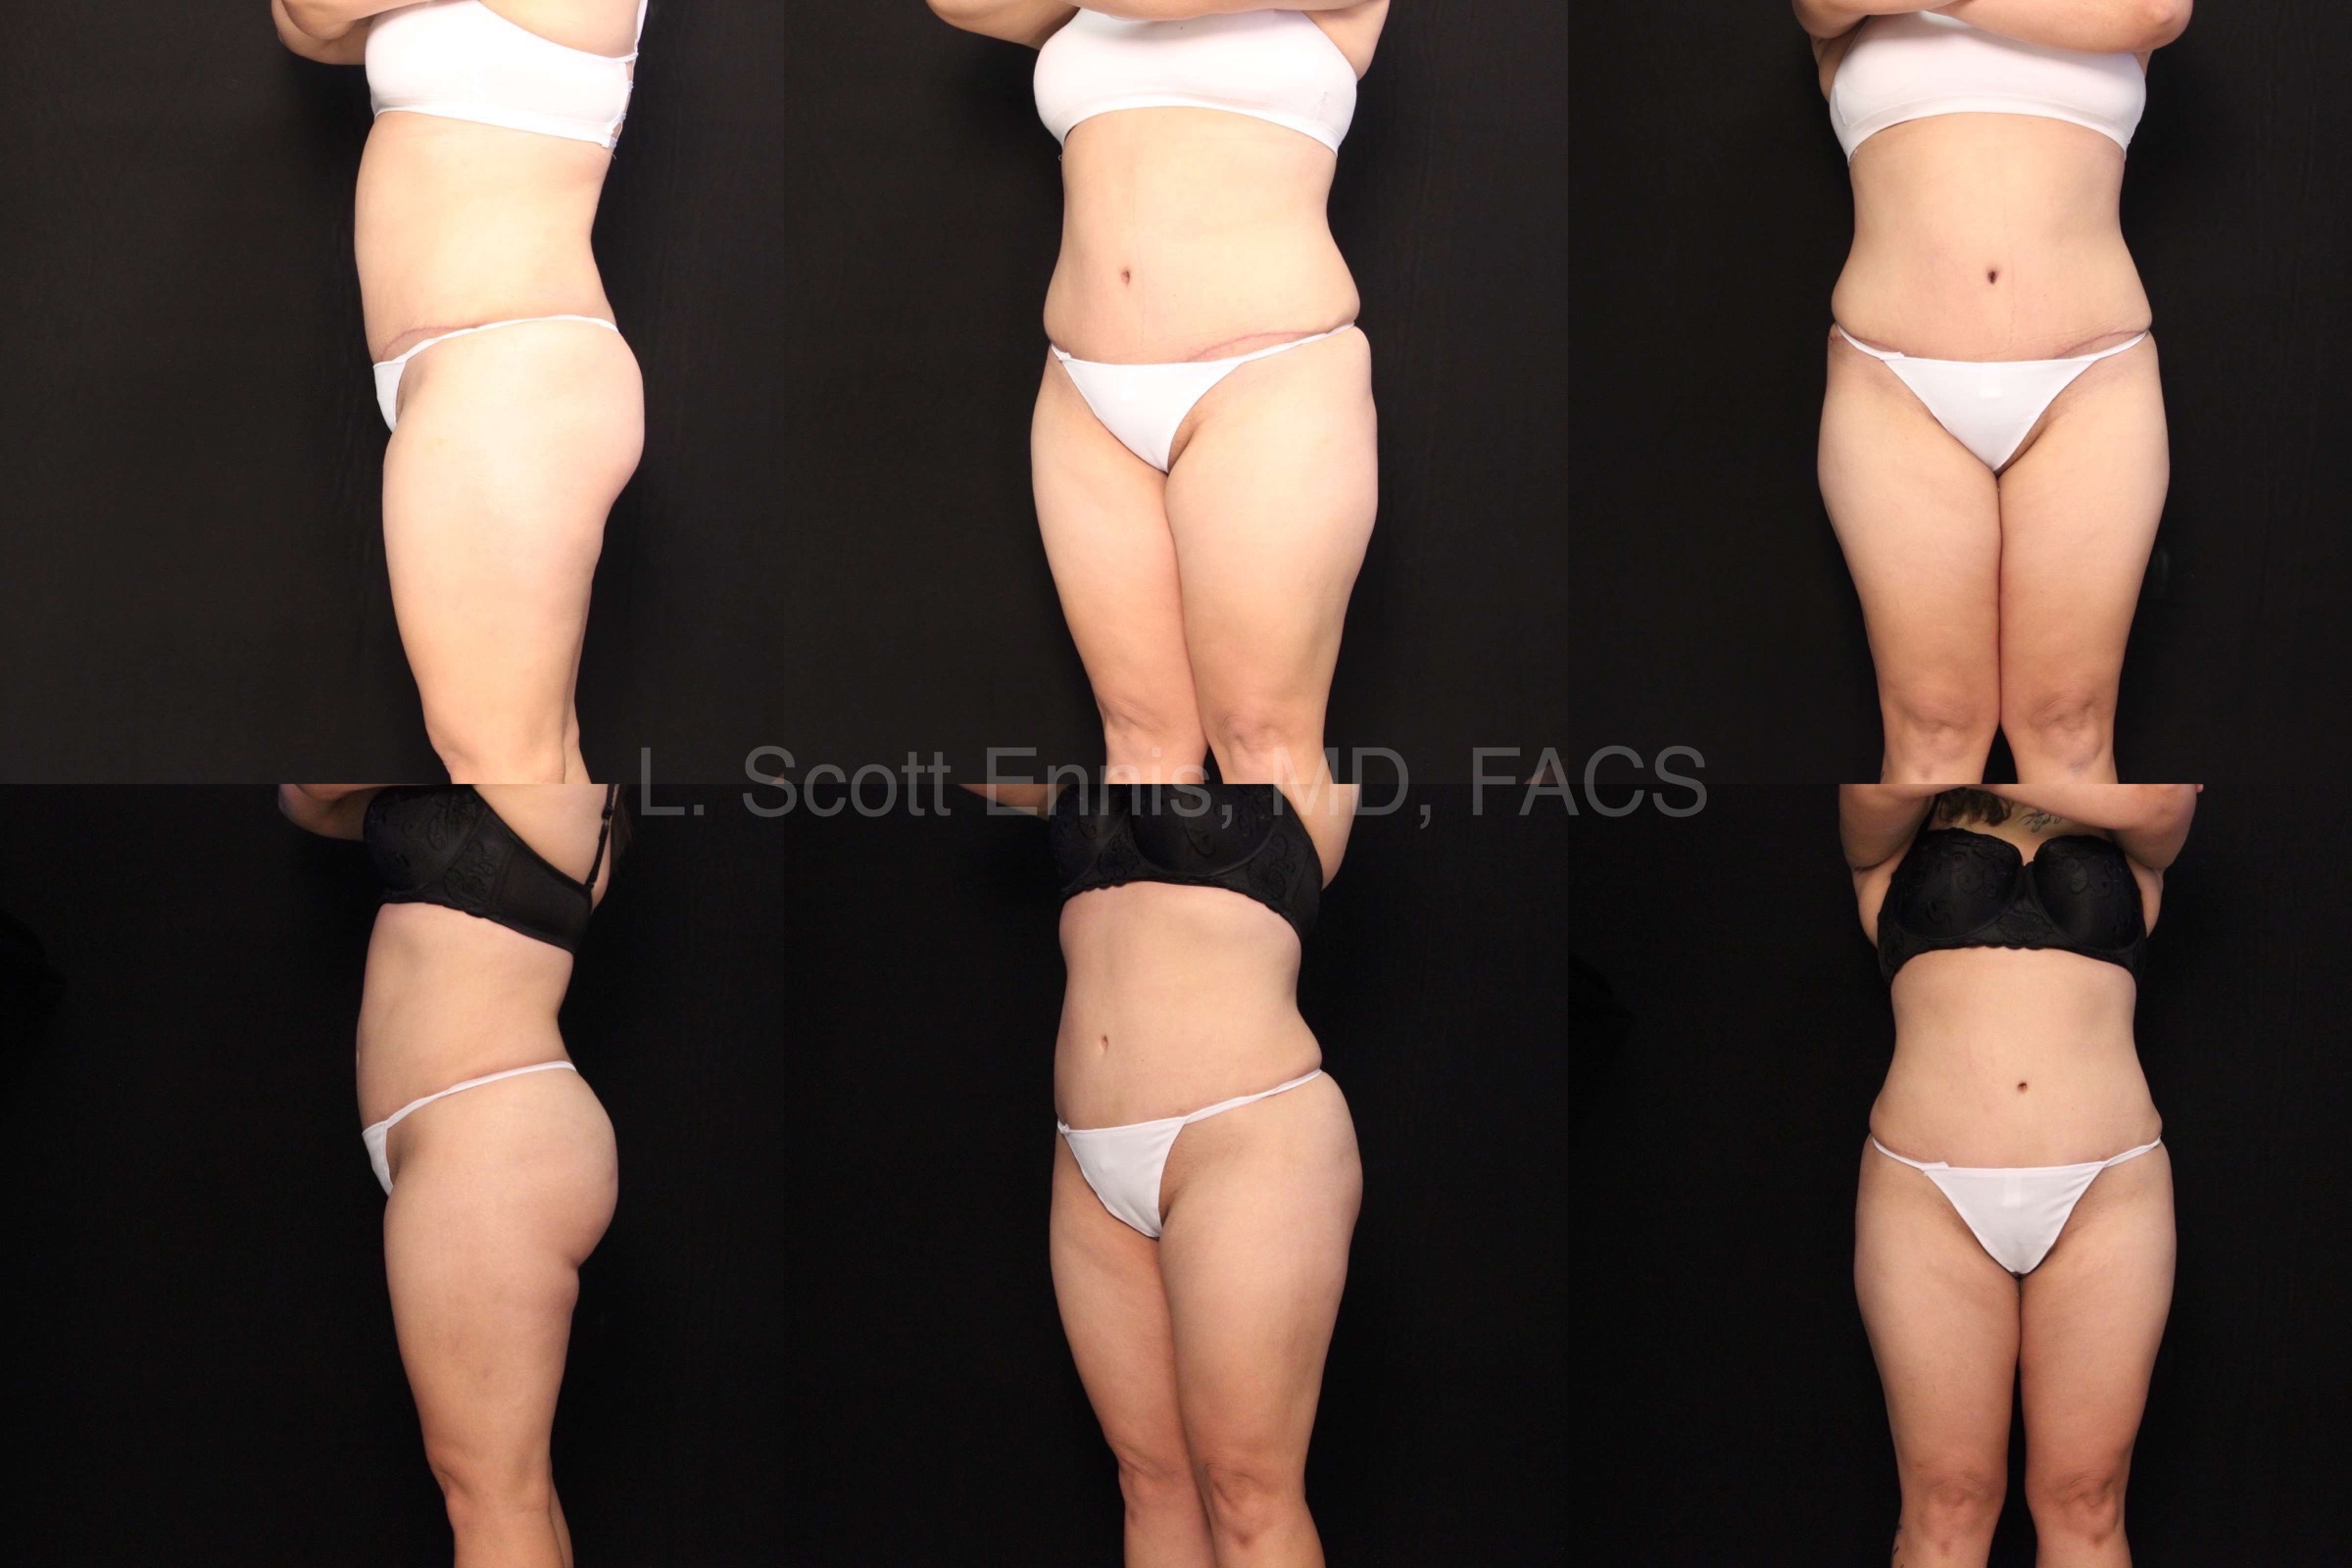 Drainless Tummy Tuck for Faster Recovery with Dr. Ennis